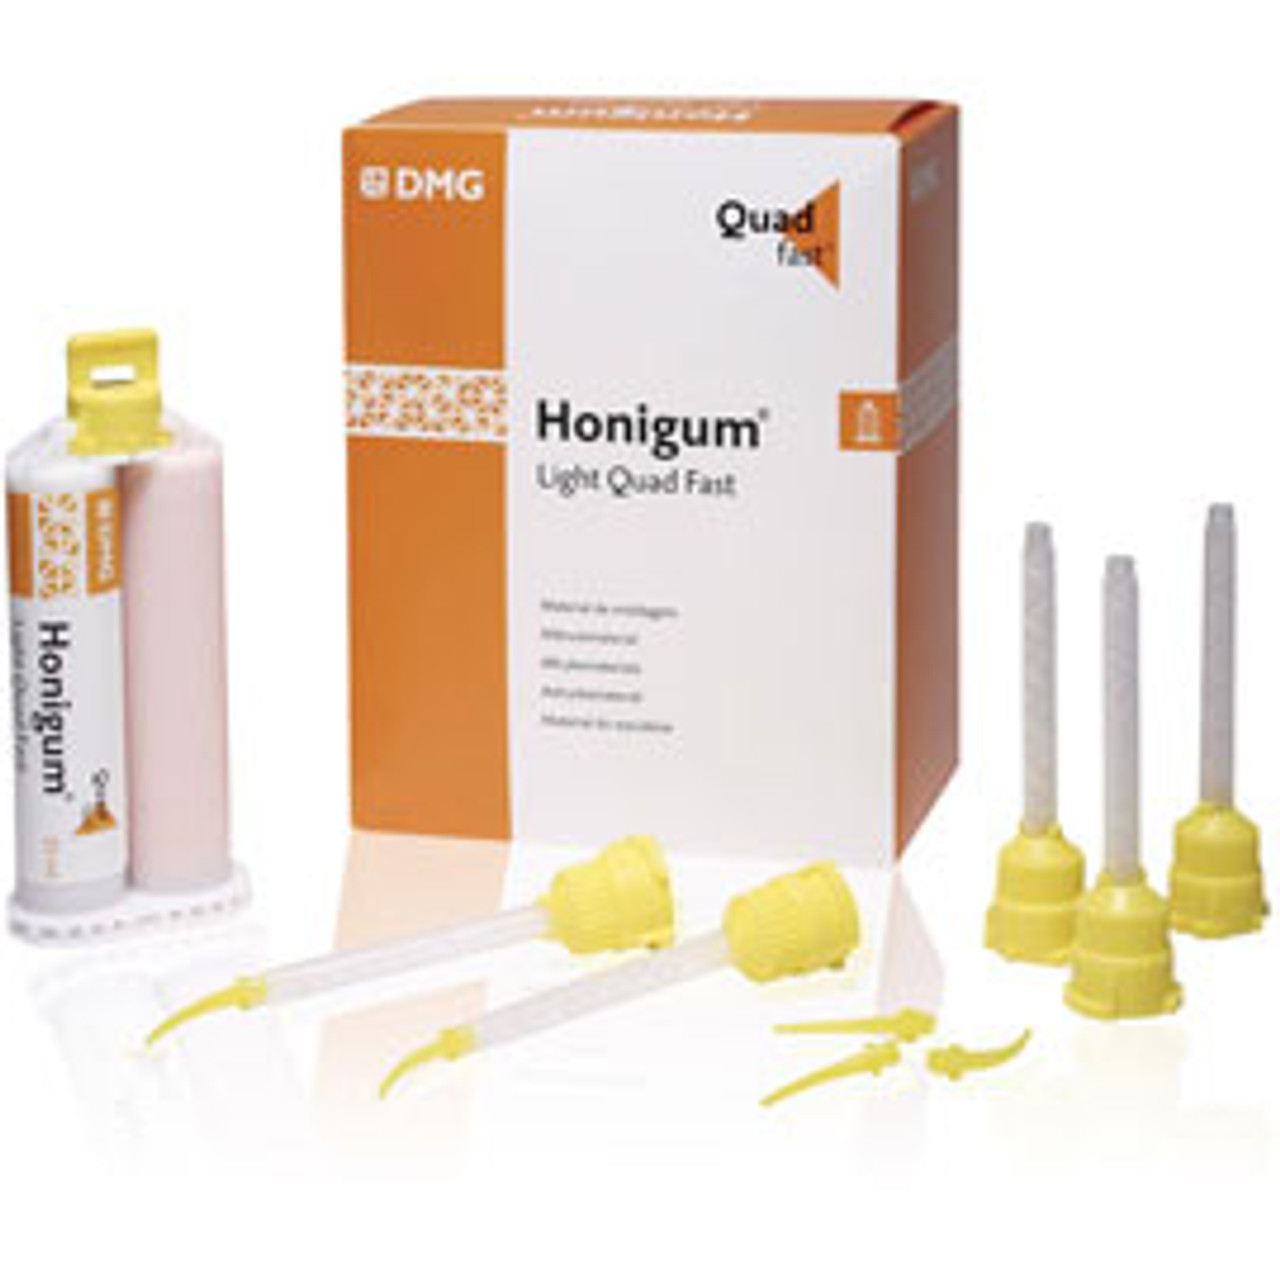 DMG Honigum Automix Light Body Quad Fast, Includes: (4) 25mL Cartridges, (16) Automix and Intra-Oral Tips/pk